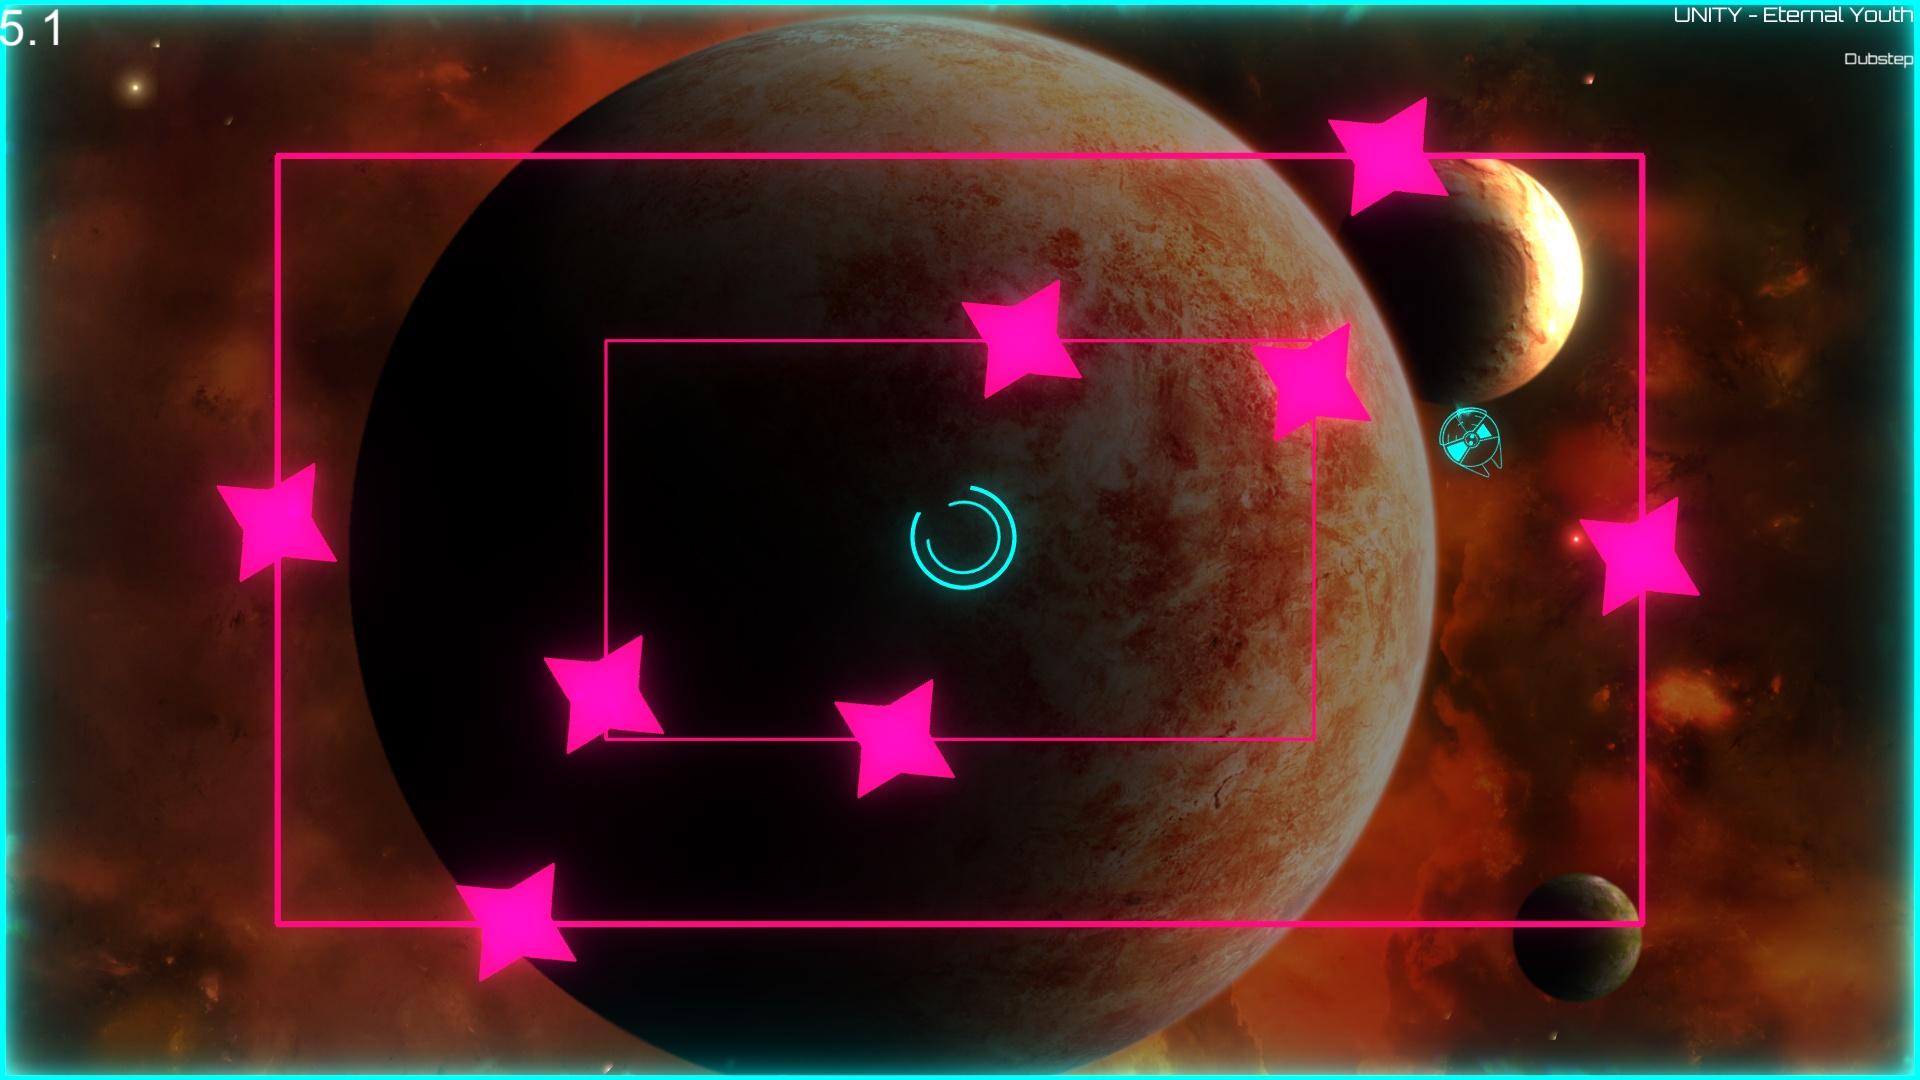 Screenshot №1 from game Neon Space 2